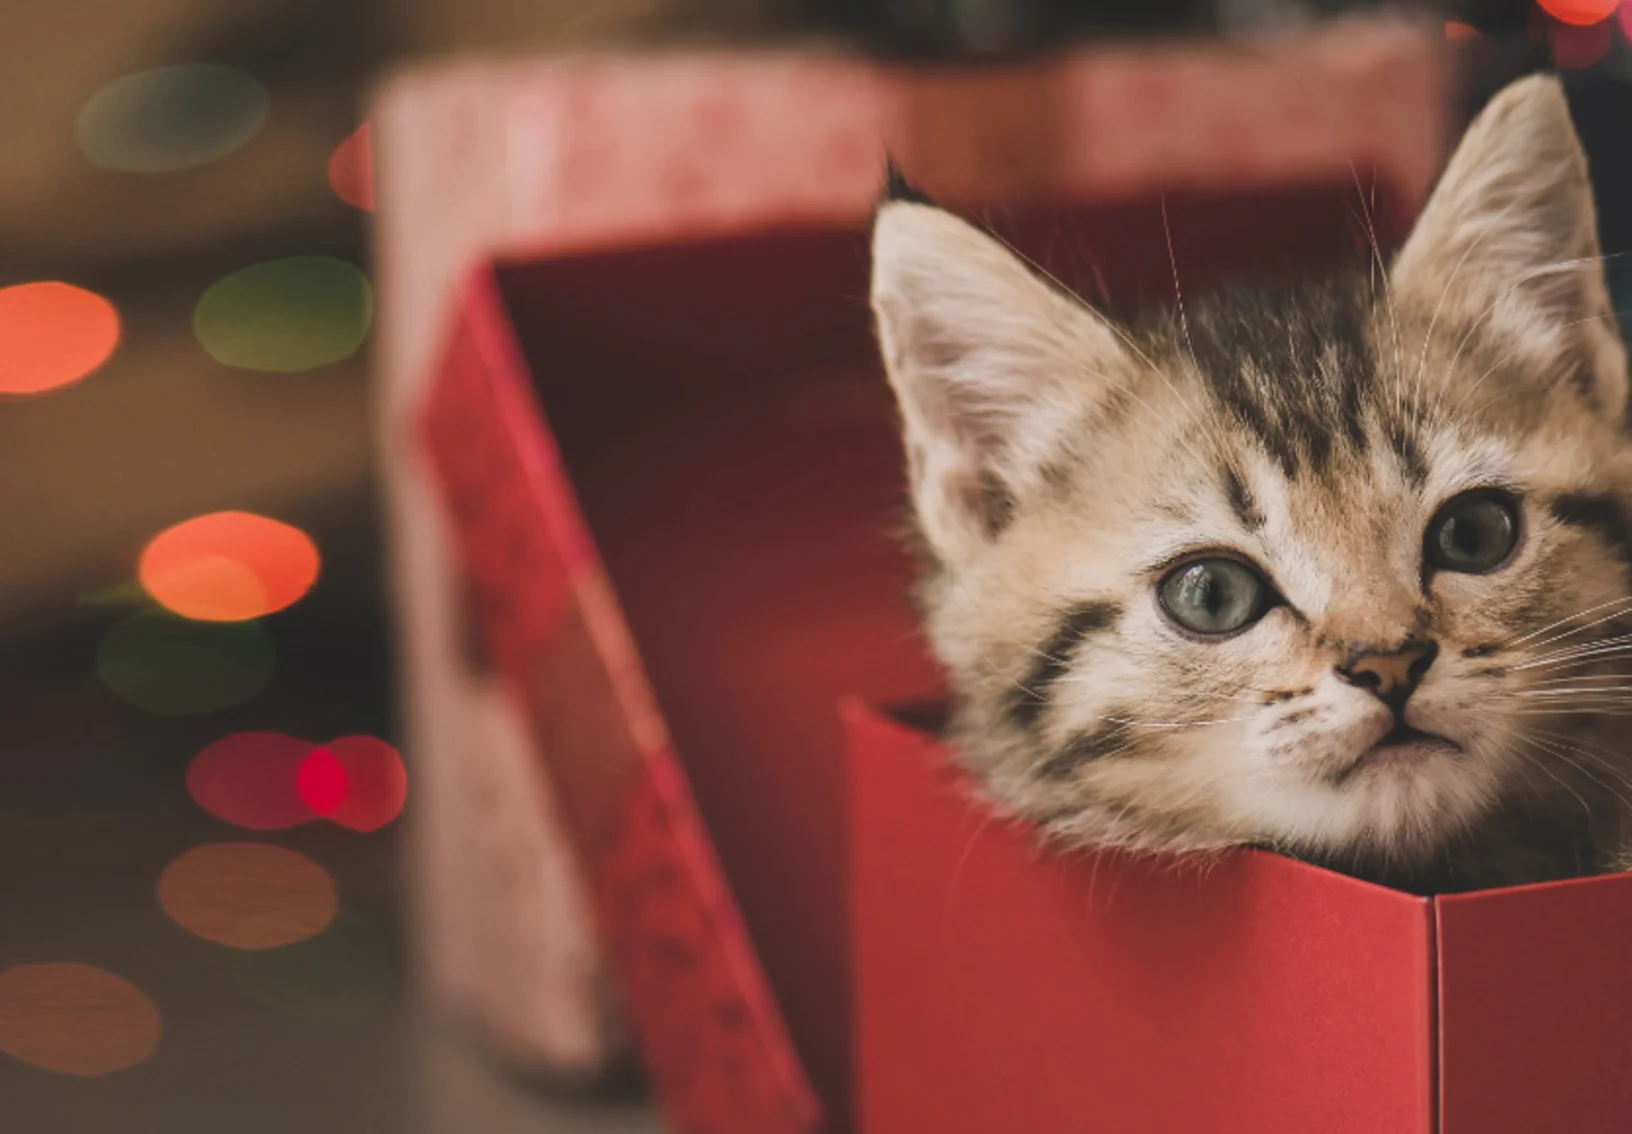 A brown kitten playing inside a red gift box